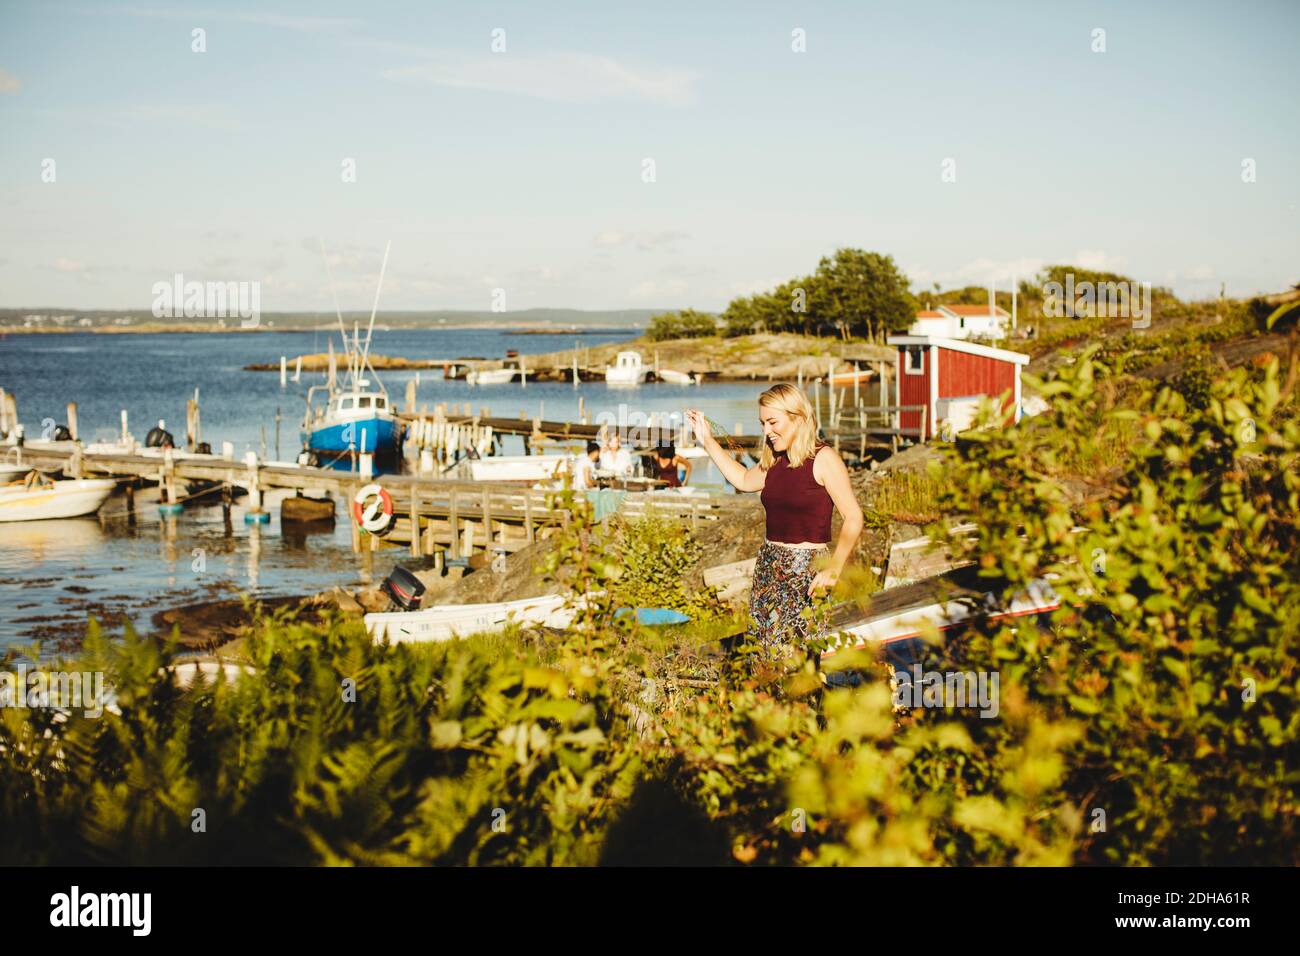 Smiling young woman walking by plants at harbor against sky on sunny day Stock Photo